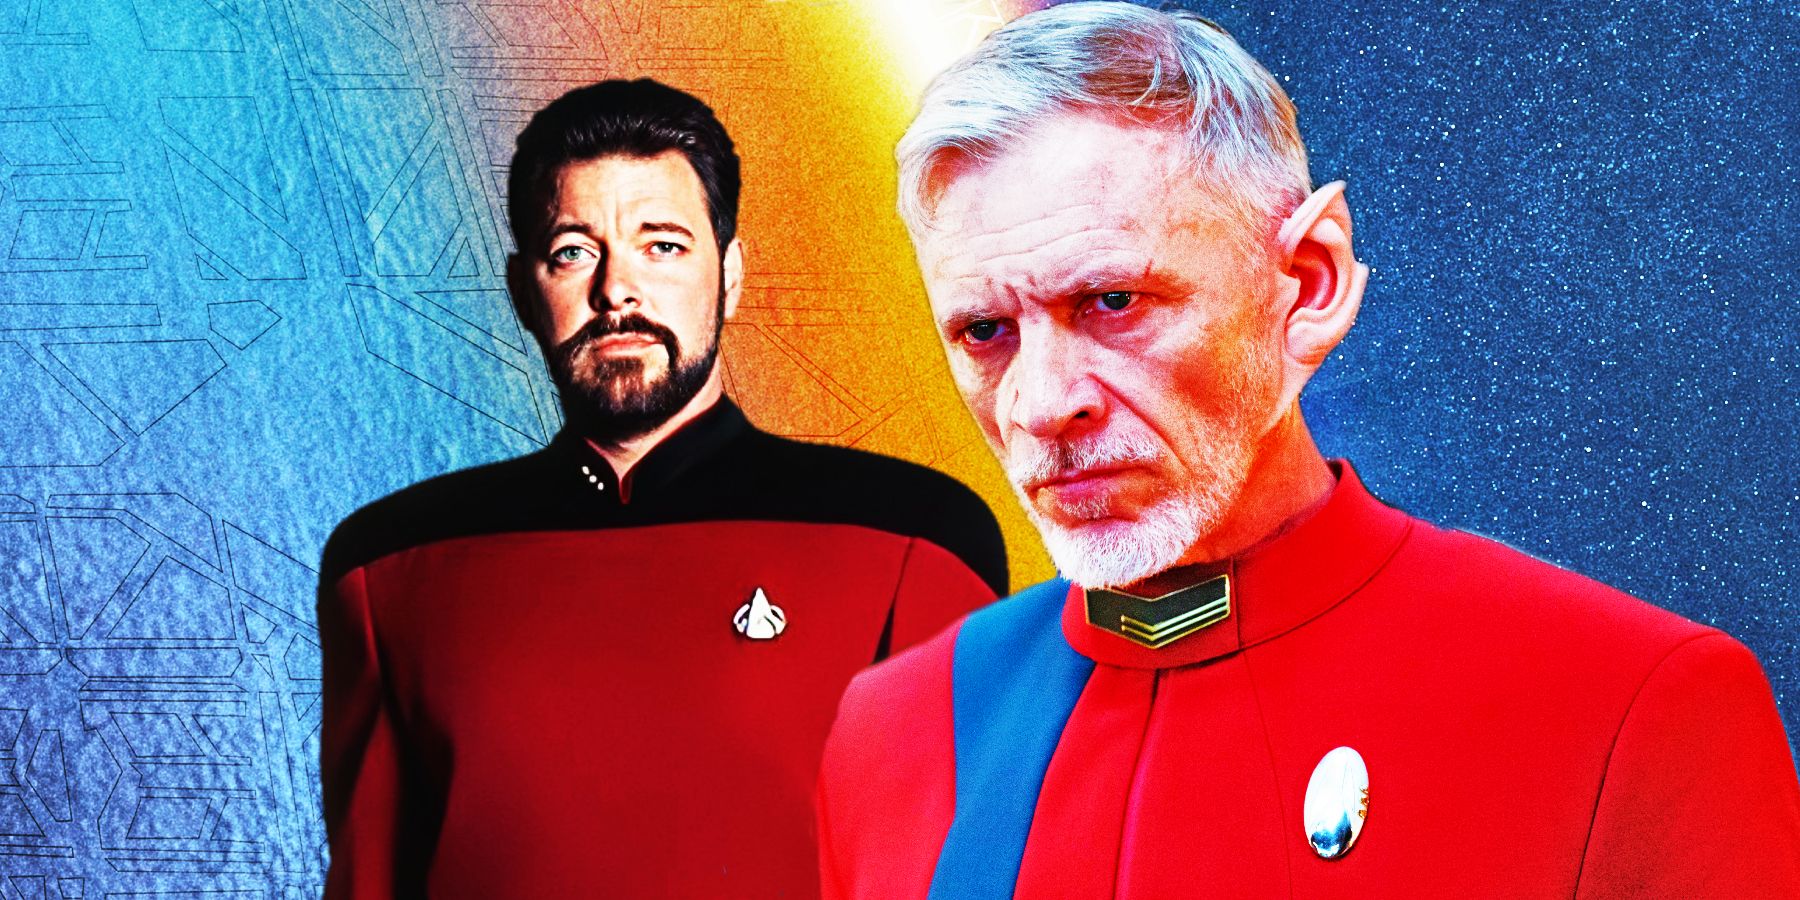 Riker and Rayner standing next to each other against a blue and orange background